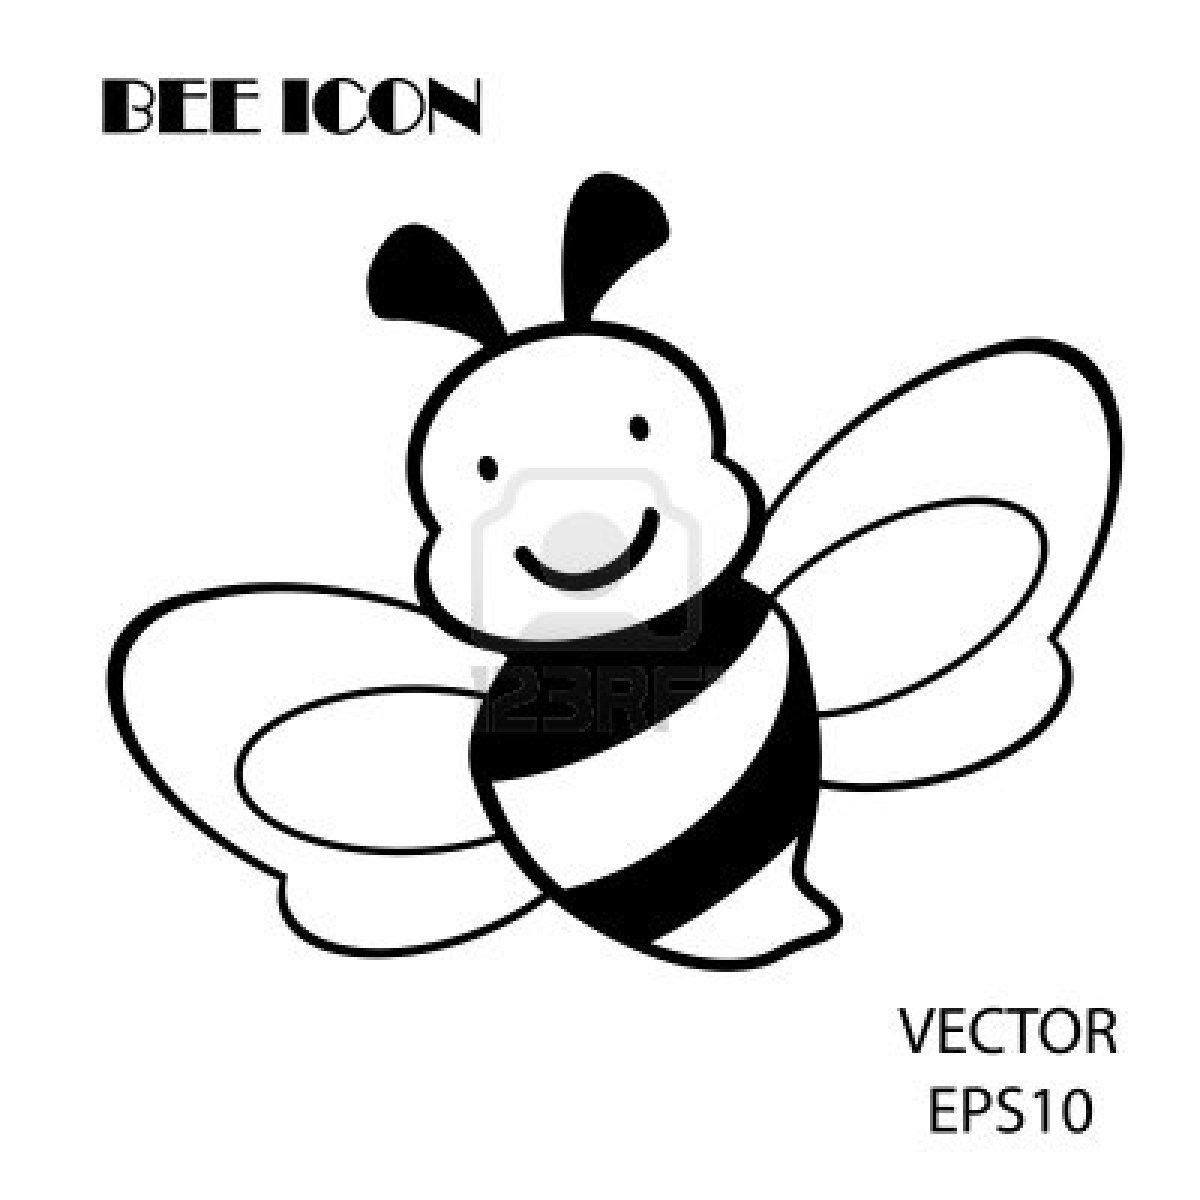 Draw Bumble Bee Coloring Pages How to Draw Bumble Bee Coloring ...